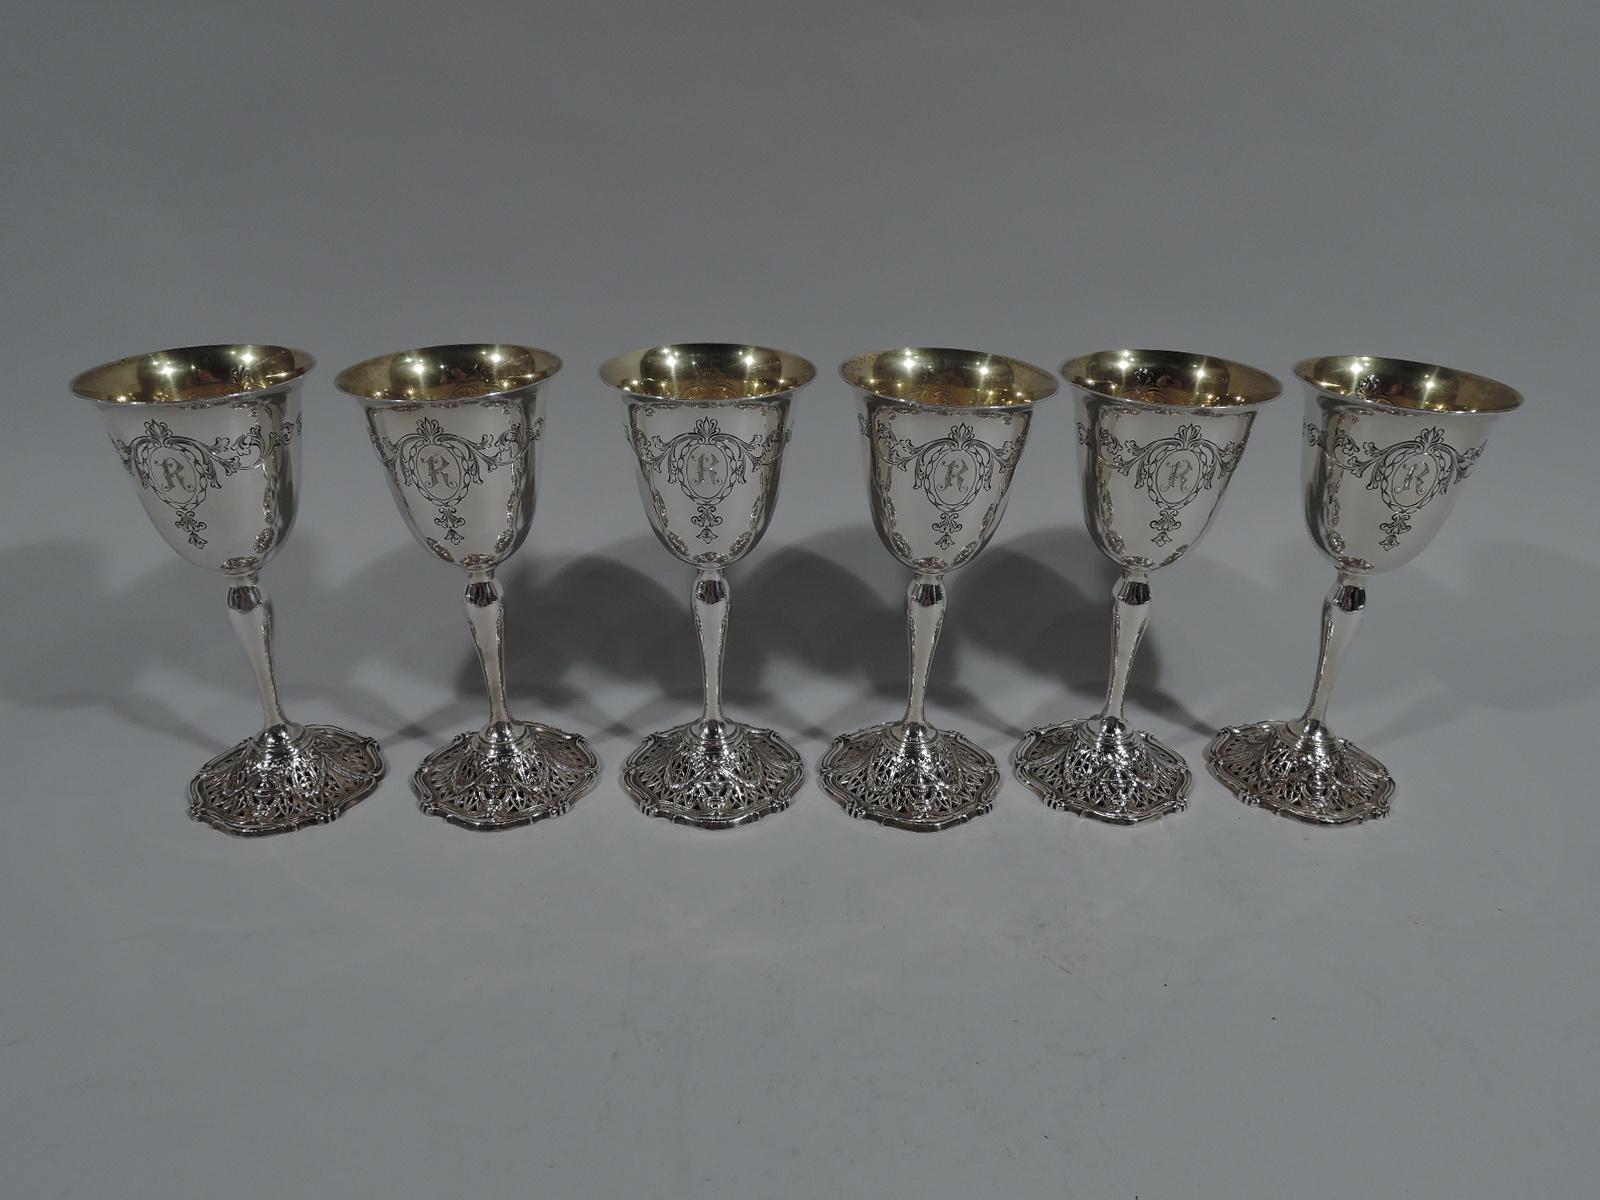 Set of 6 Edwardian Regency sterling silver goblets in Adam pattern. Made by Shreve & Co. in San Francisco, circa 1915. Each: Bell-form bowl, baluster stem, and domed foot. Bowl exterior has two engraved oval frames with leafy scrolls and pendant